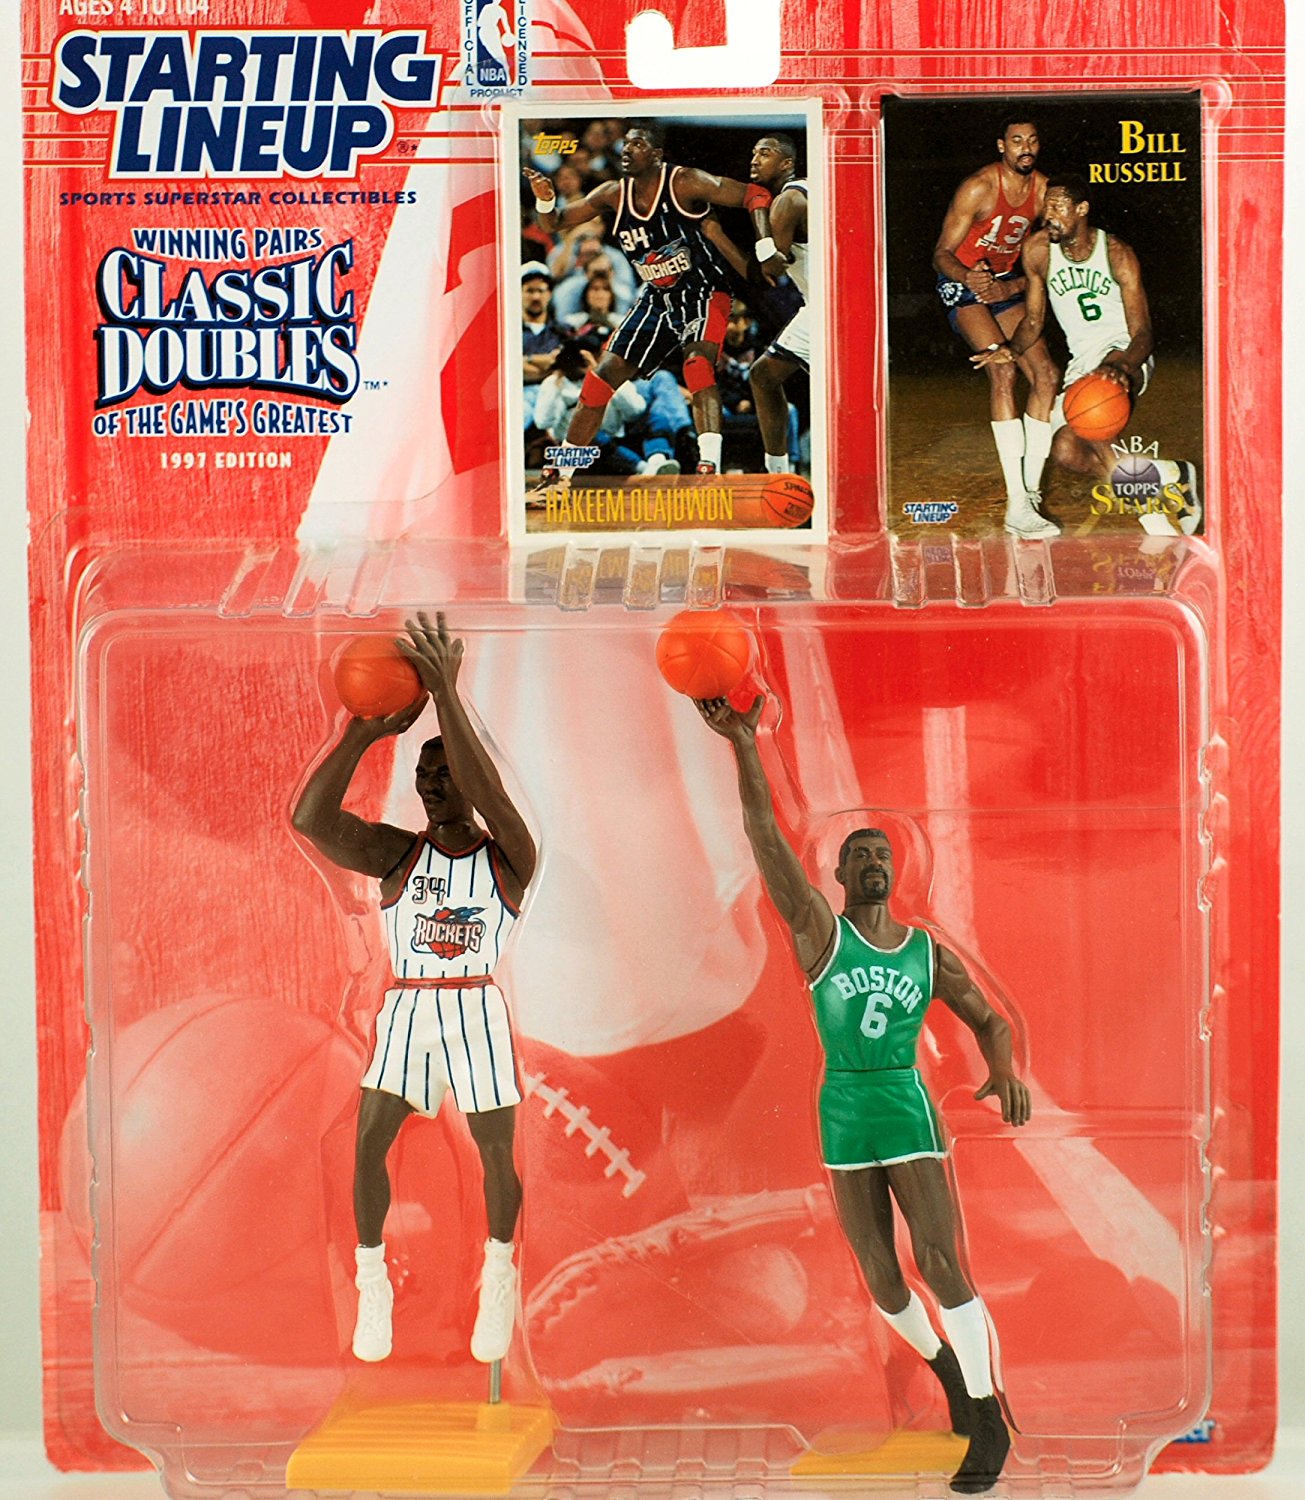 HAKEEM OLAJUWON / HOUSTON ROCKETS & BILL RUSSELL / BOSTON CELTICS 1997 NBA Classic Doubles Kenner Starting Lineup Sports Superstar Collectibles & Exclusive NBA Trading Cards